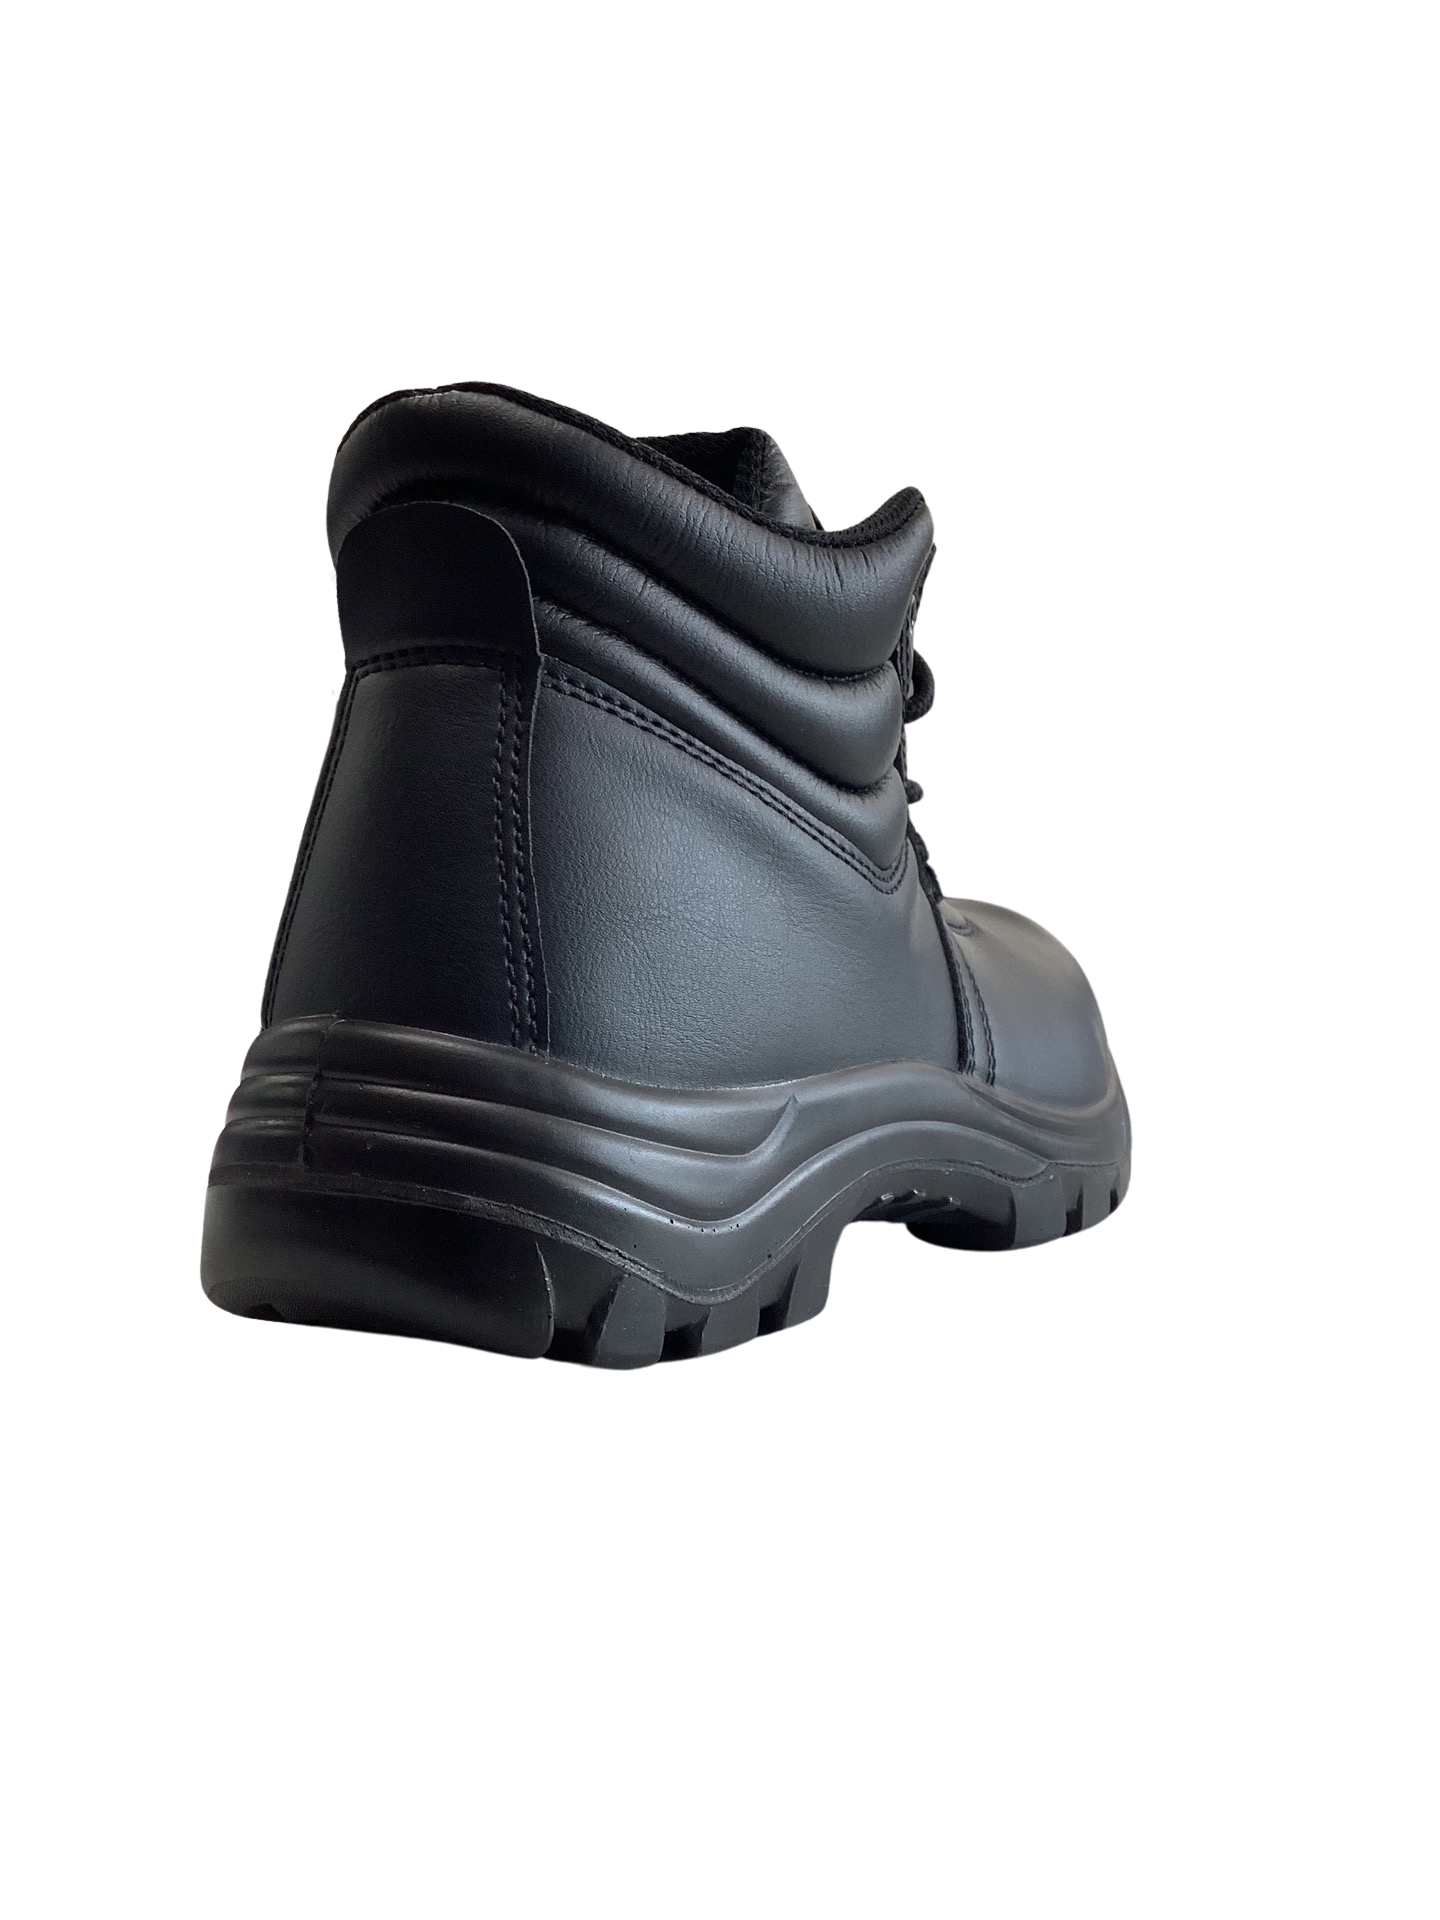 Tiger safety boot